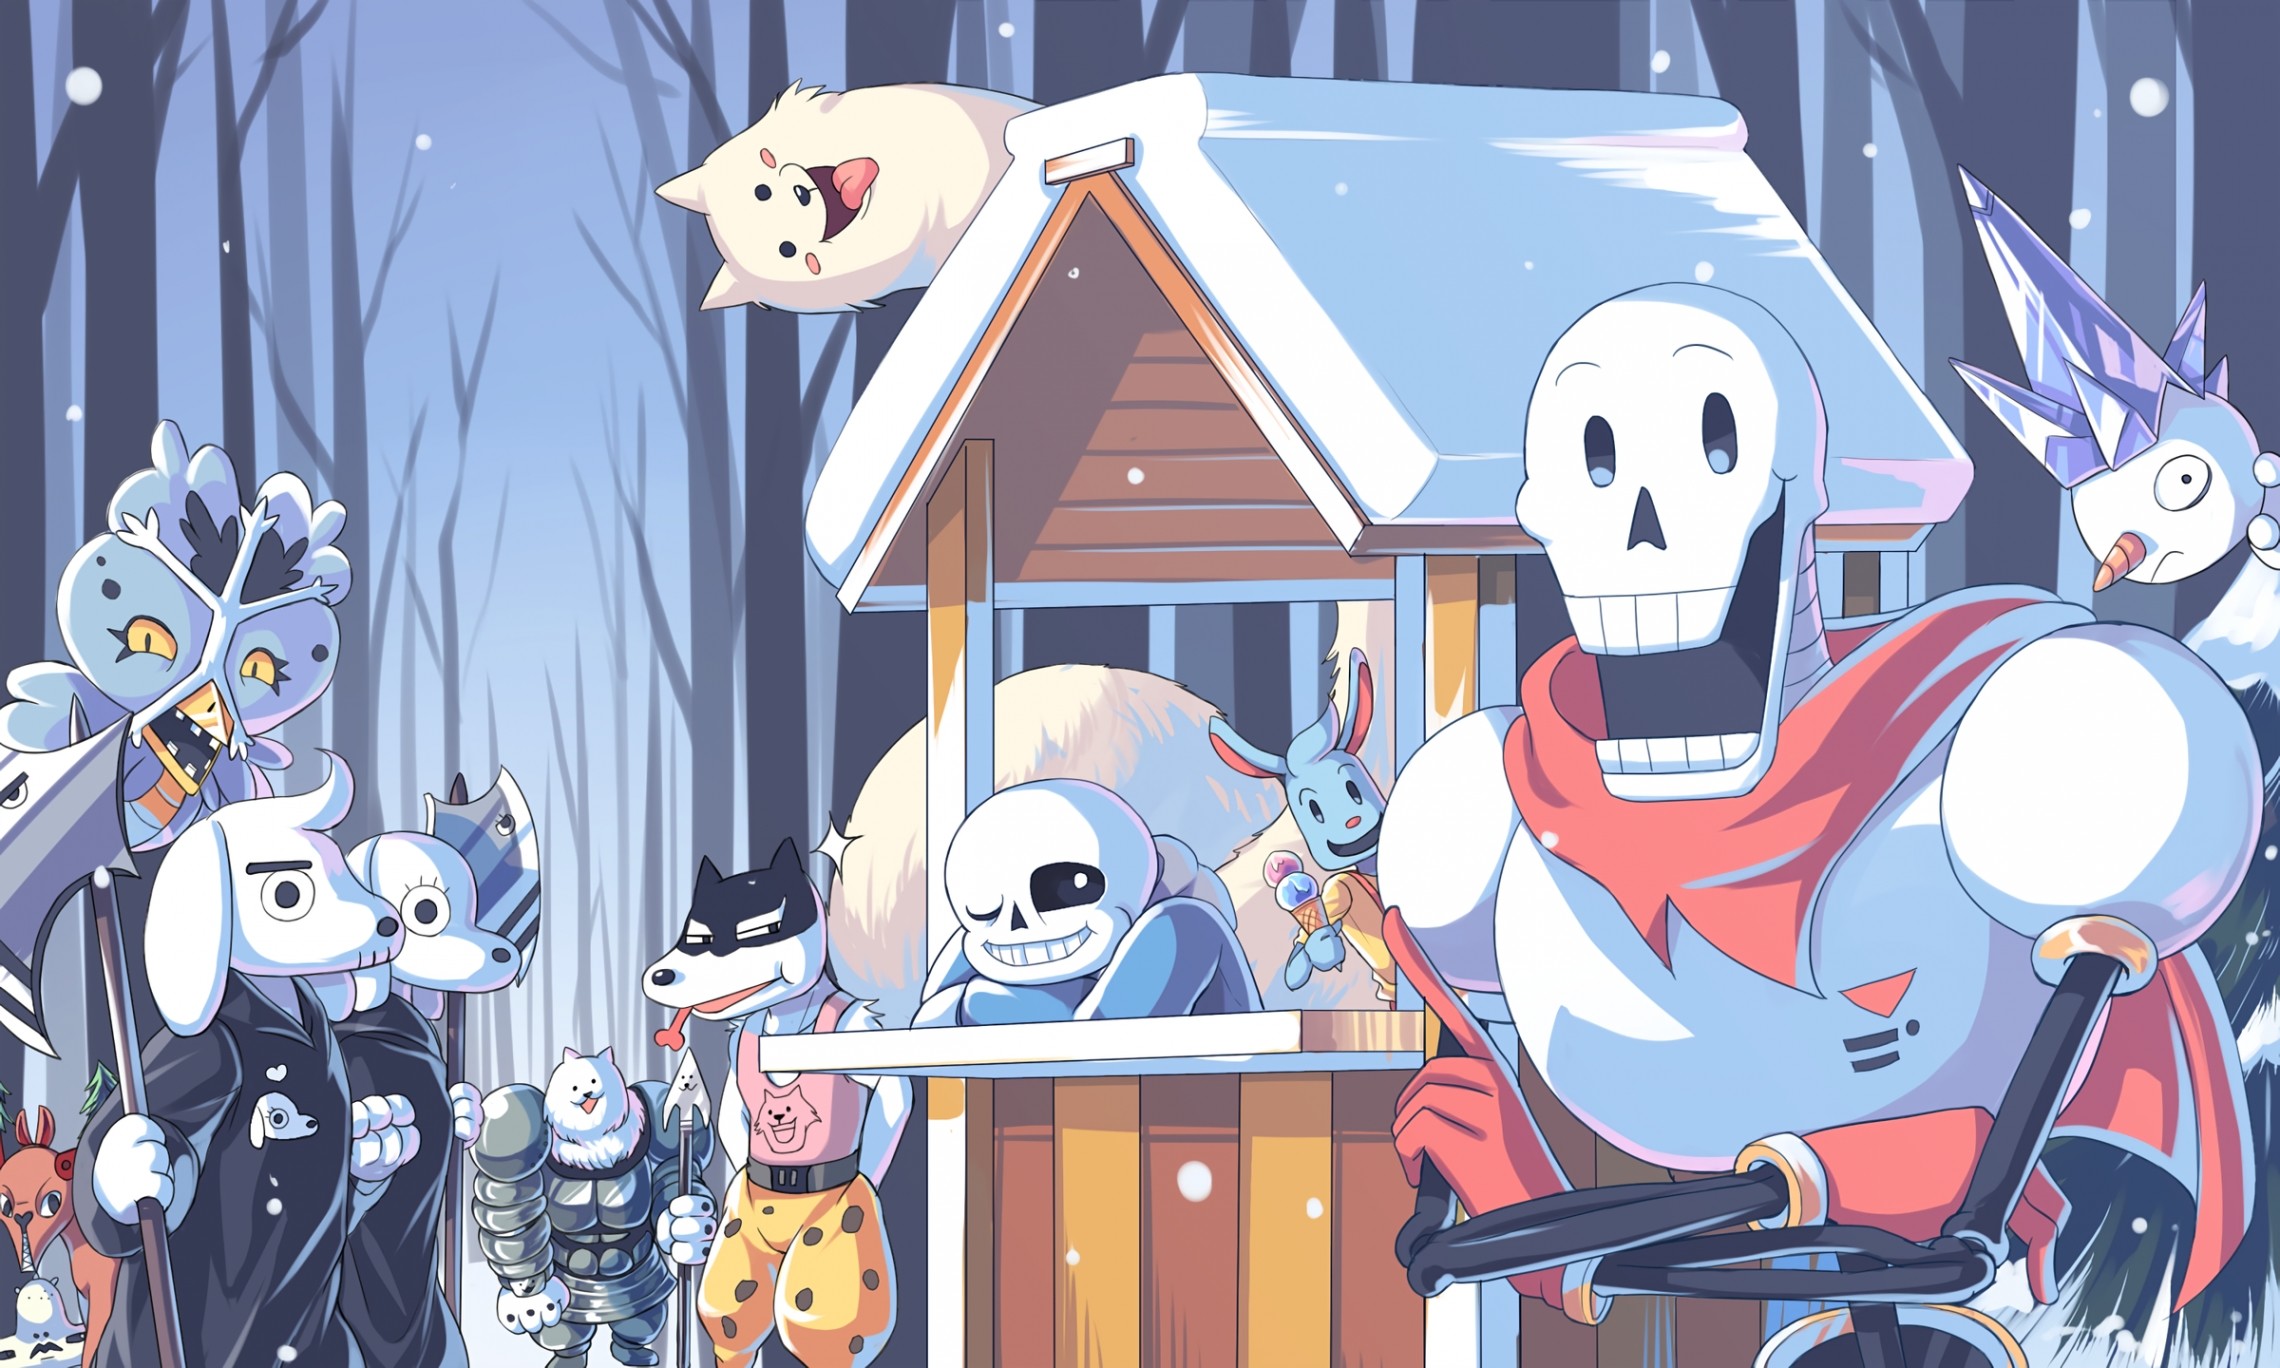 2280x1368 25 Papyrus (undertale) Hd Wallpapers | Backgrounds - Wallpaper Abyss with Undertale  Wallpaper Papyrus